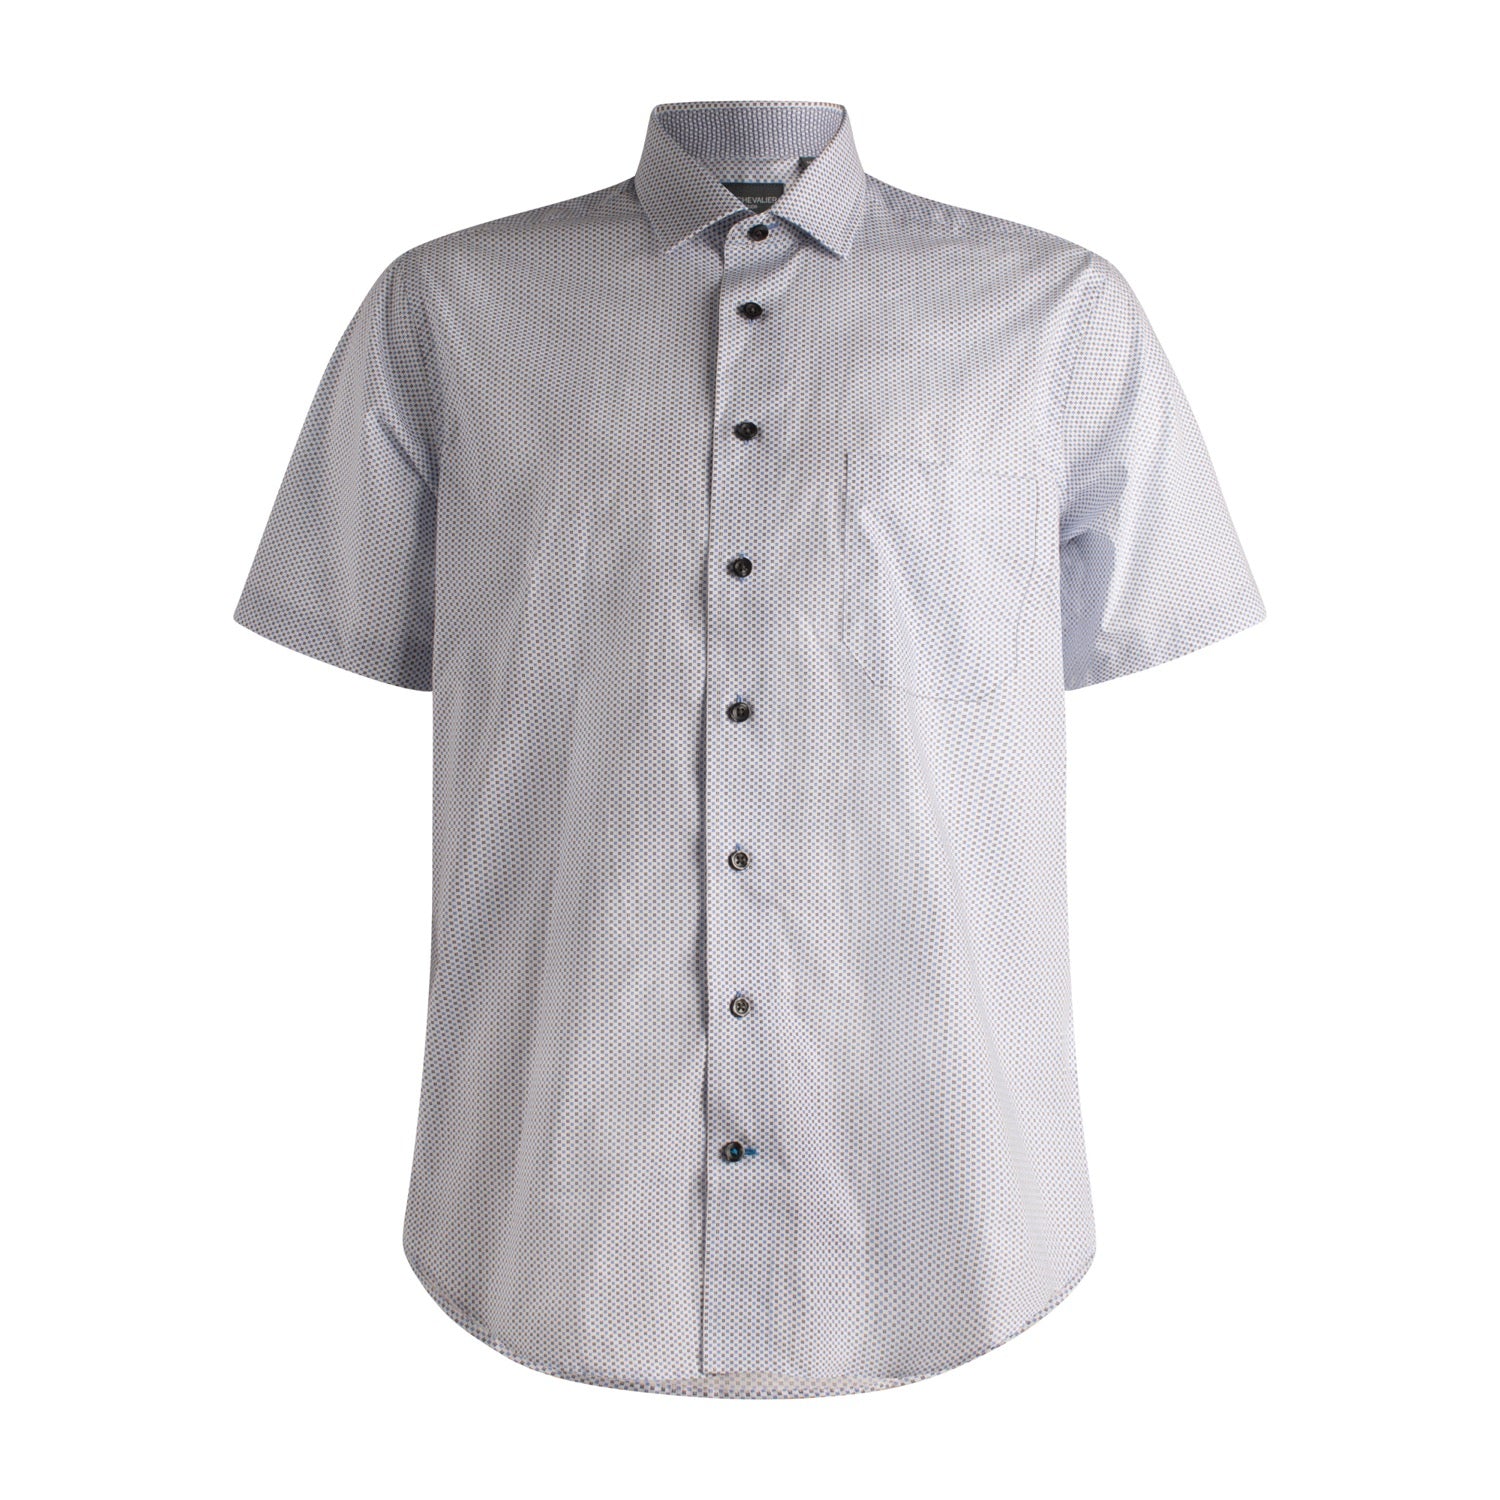 Blue and White Neat Print Short Sleeve No-Iron Cotton Sport Shirt with Spread Collar by Leo Chevalier